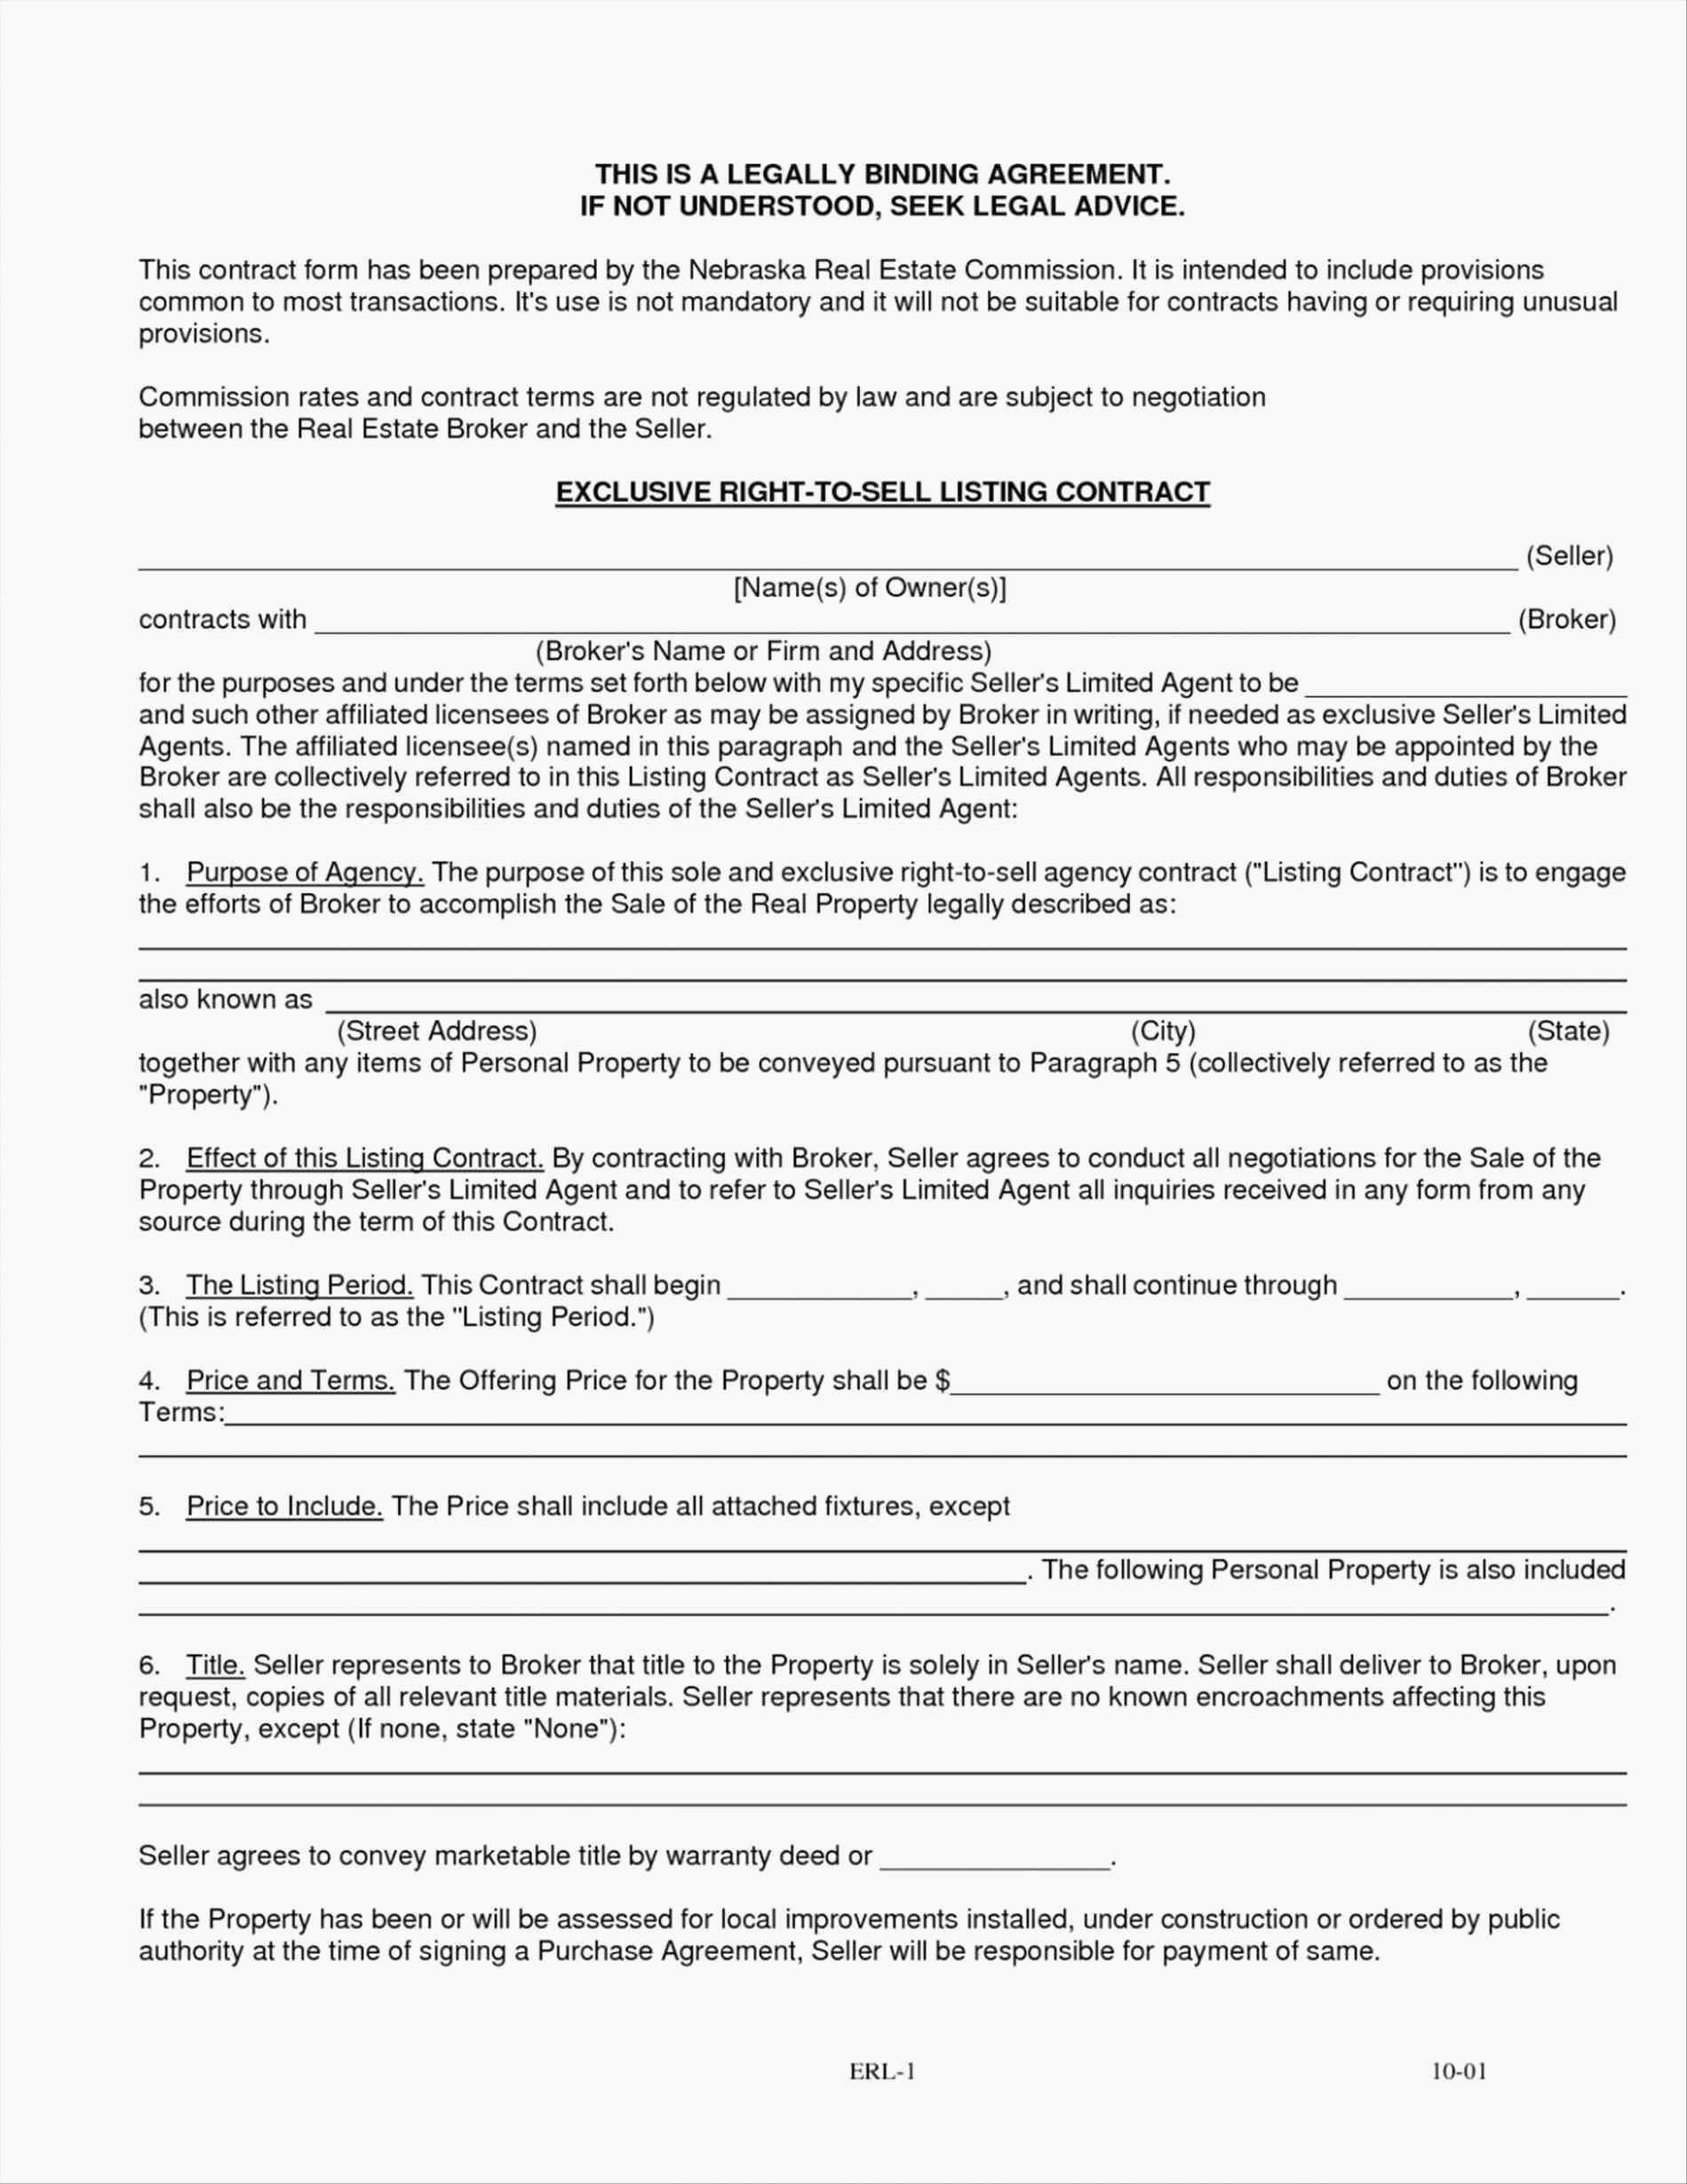 Buy Sell Agreement Llc 028 Buy Sell Agreement Forms Fresh Sales Mission Contract Template